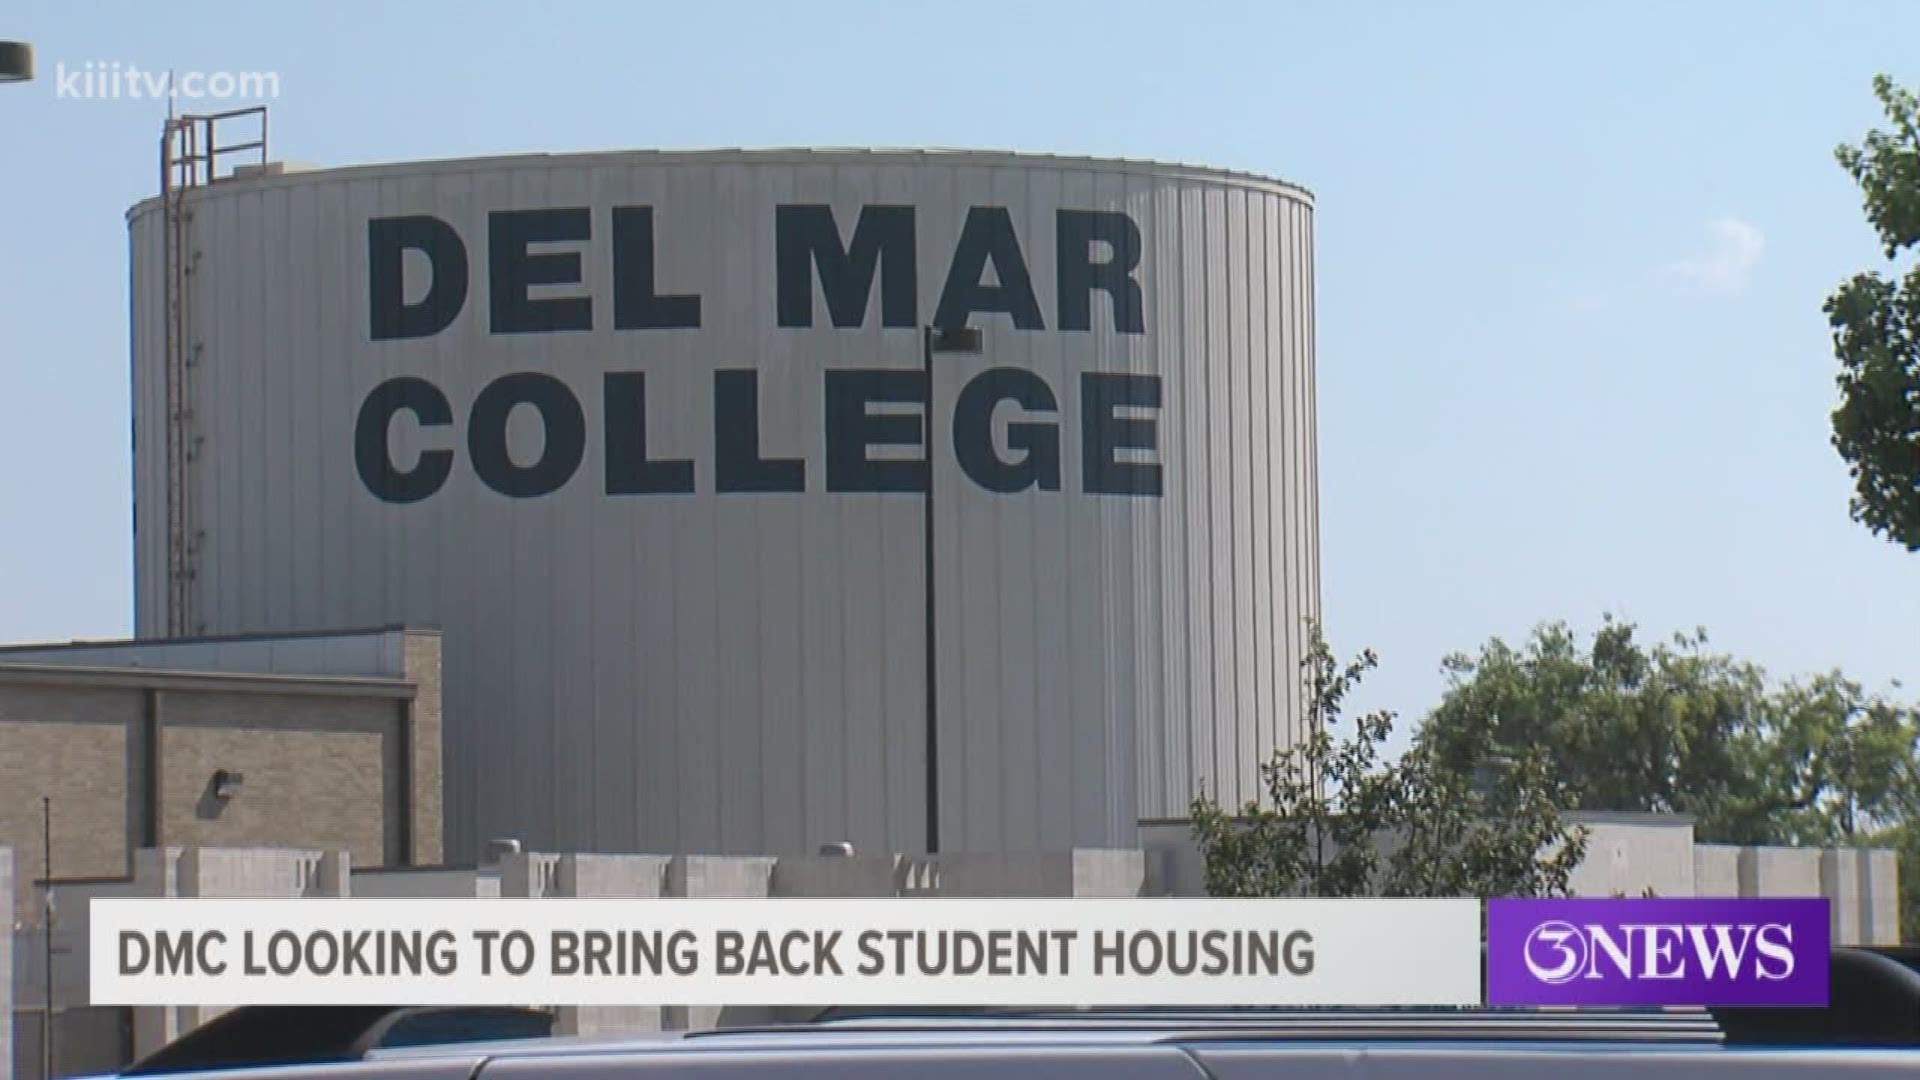 The Del Mar College Board voted to look into bringing back student housing.